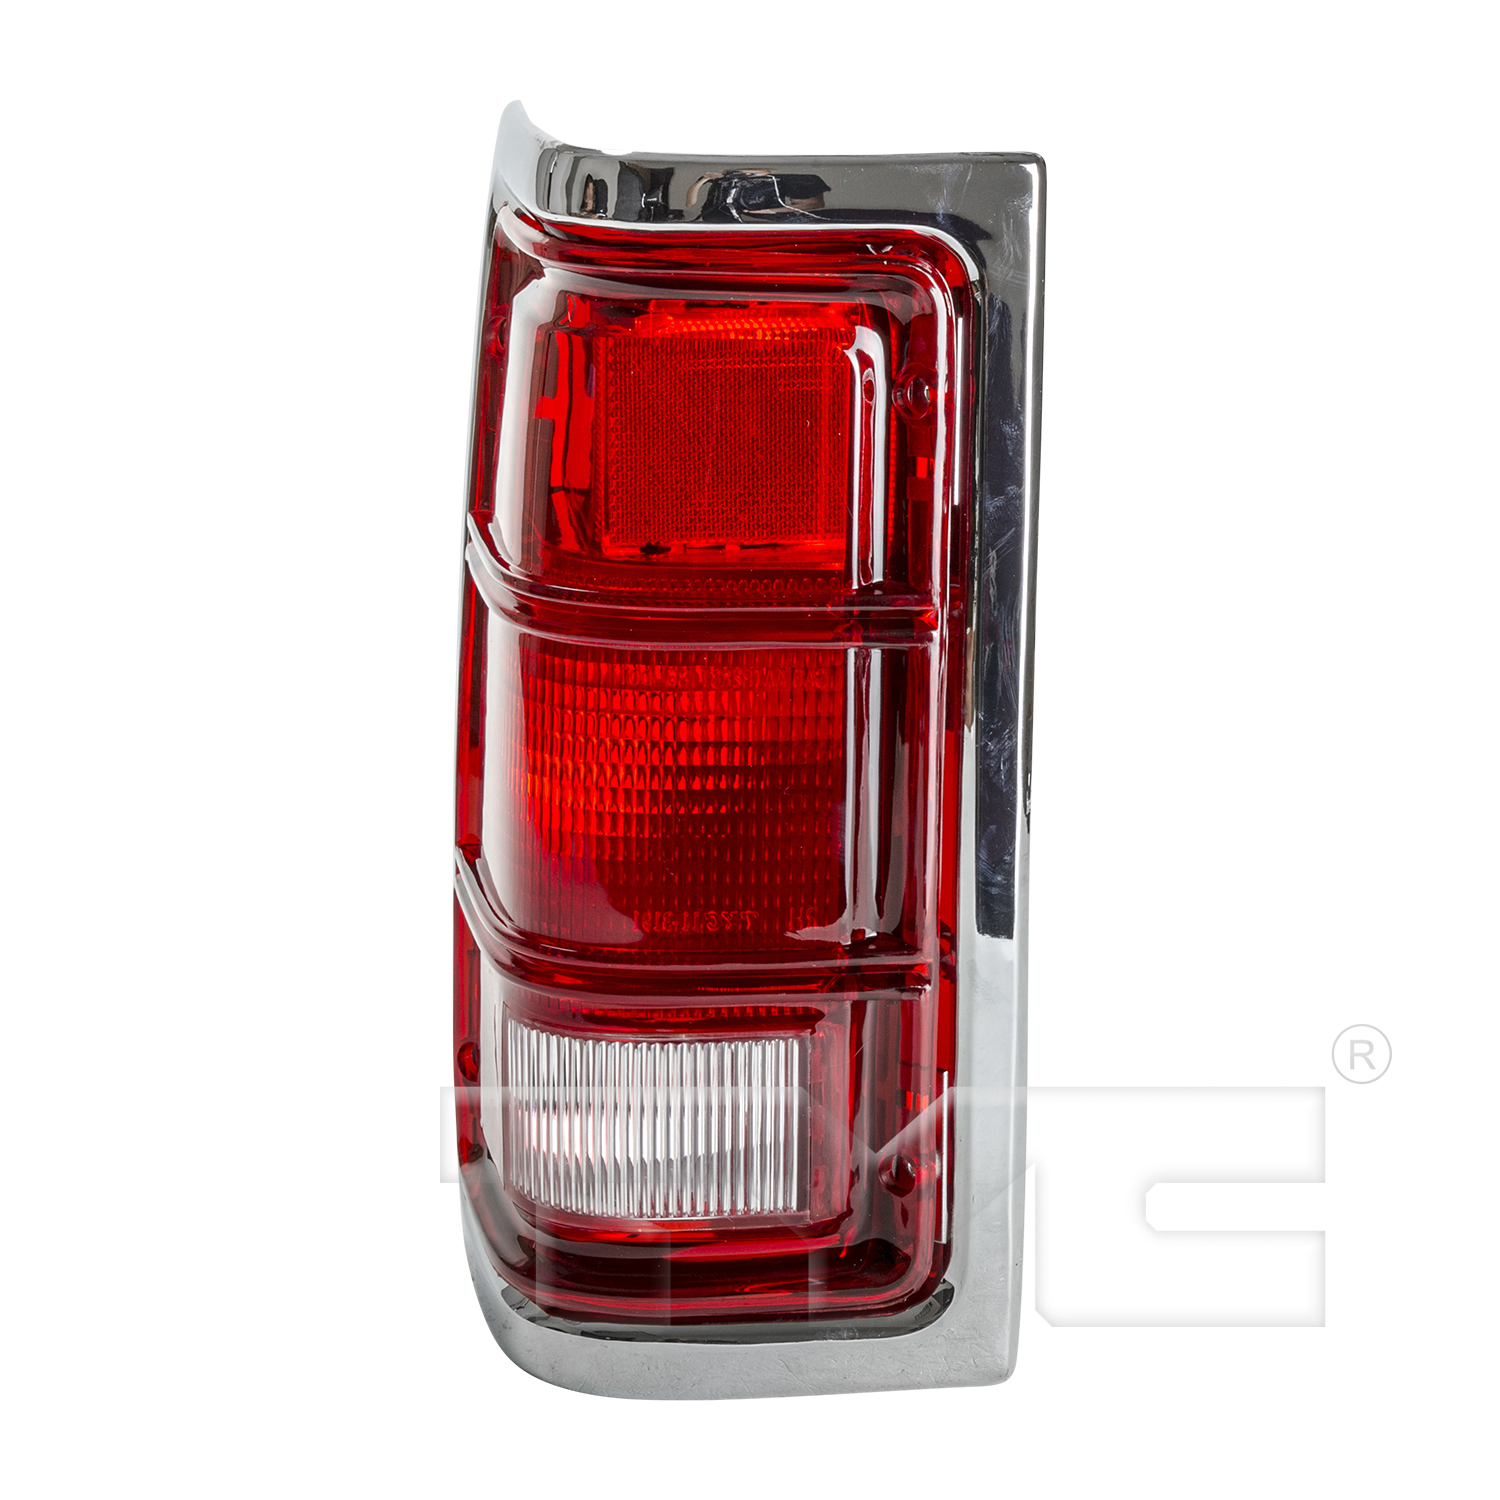 Aftermarket TAILLIGHTS for DODGE - W100, W100,87-89,LT Taillamp lens